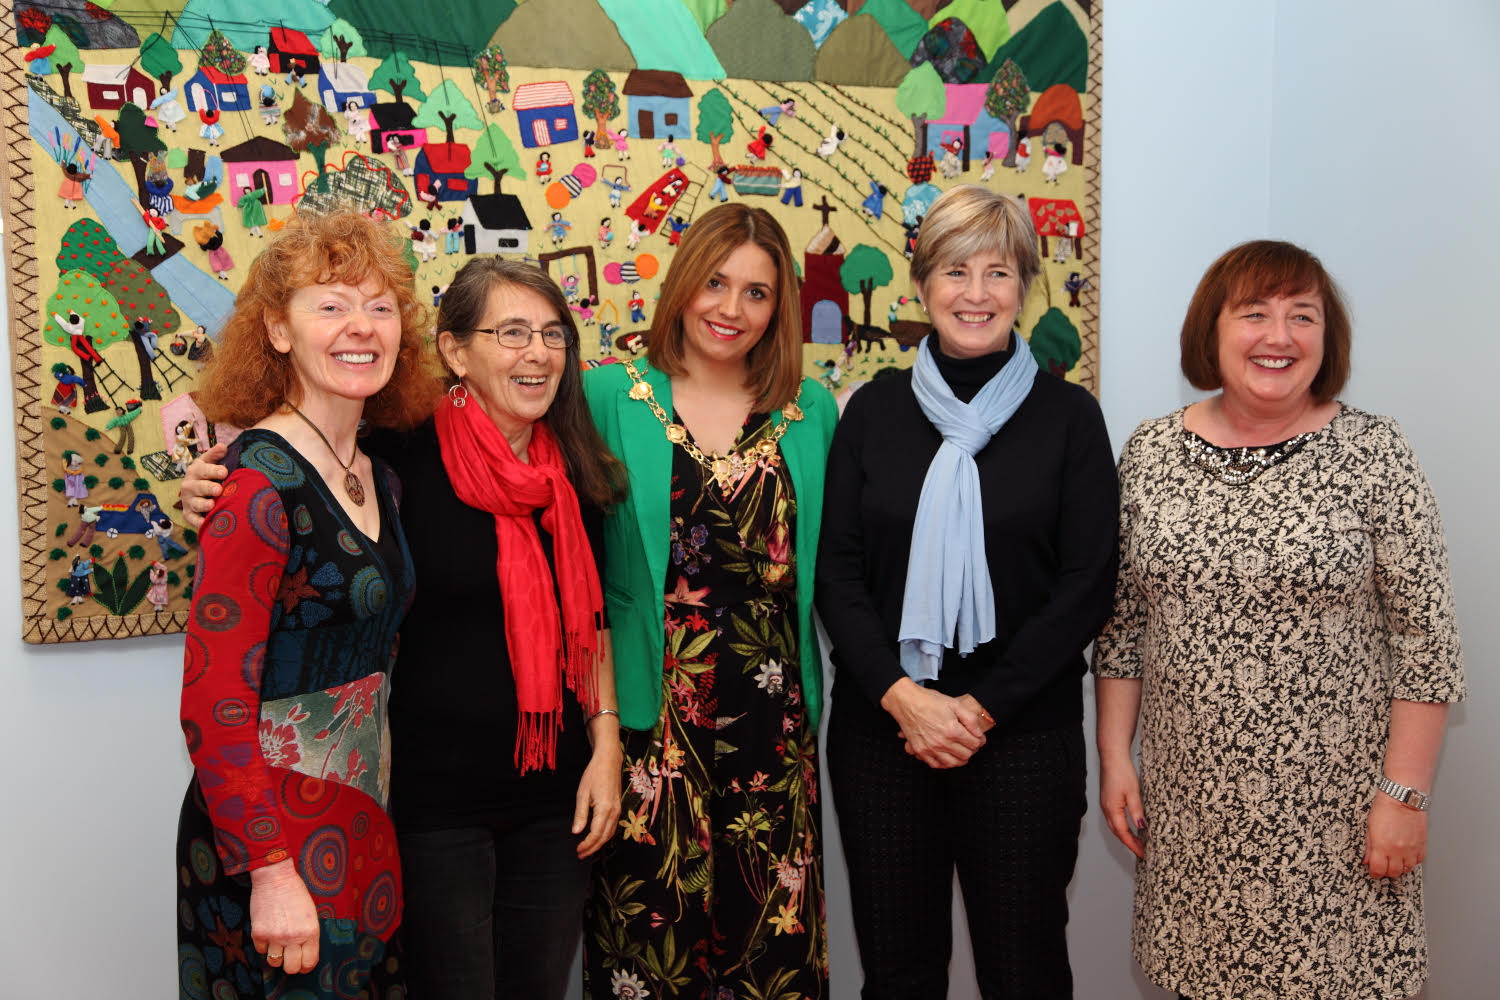 (L-R) Breege Doherty, Roberta Bacic, Councillor Elisha McCallion - Mayor of Derry City & Strabane District Council, Professor Gillian Robinson and Margaret Edwards at the launch of the new Conflict Textiles website, 19th Nov, 2015. (Photo: Martin Melaugh)